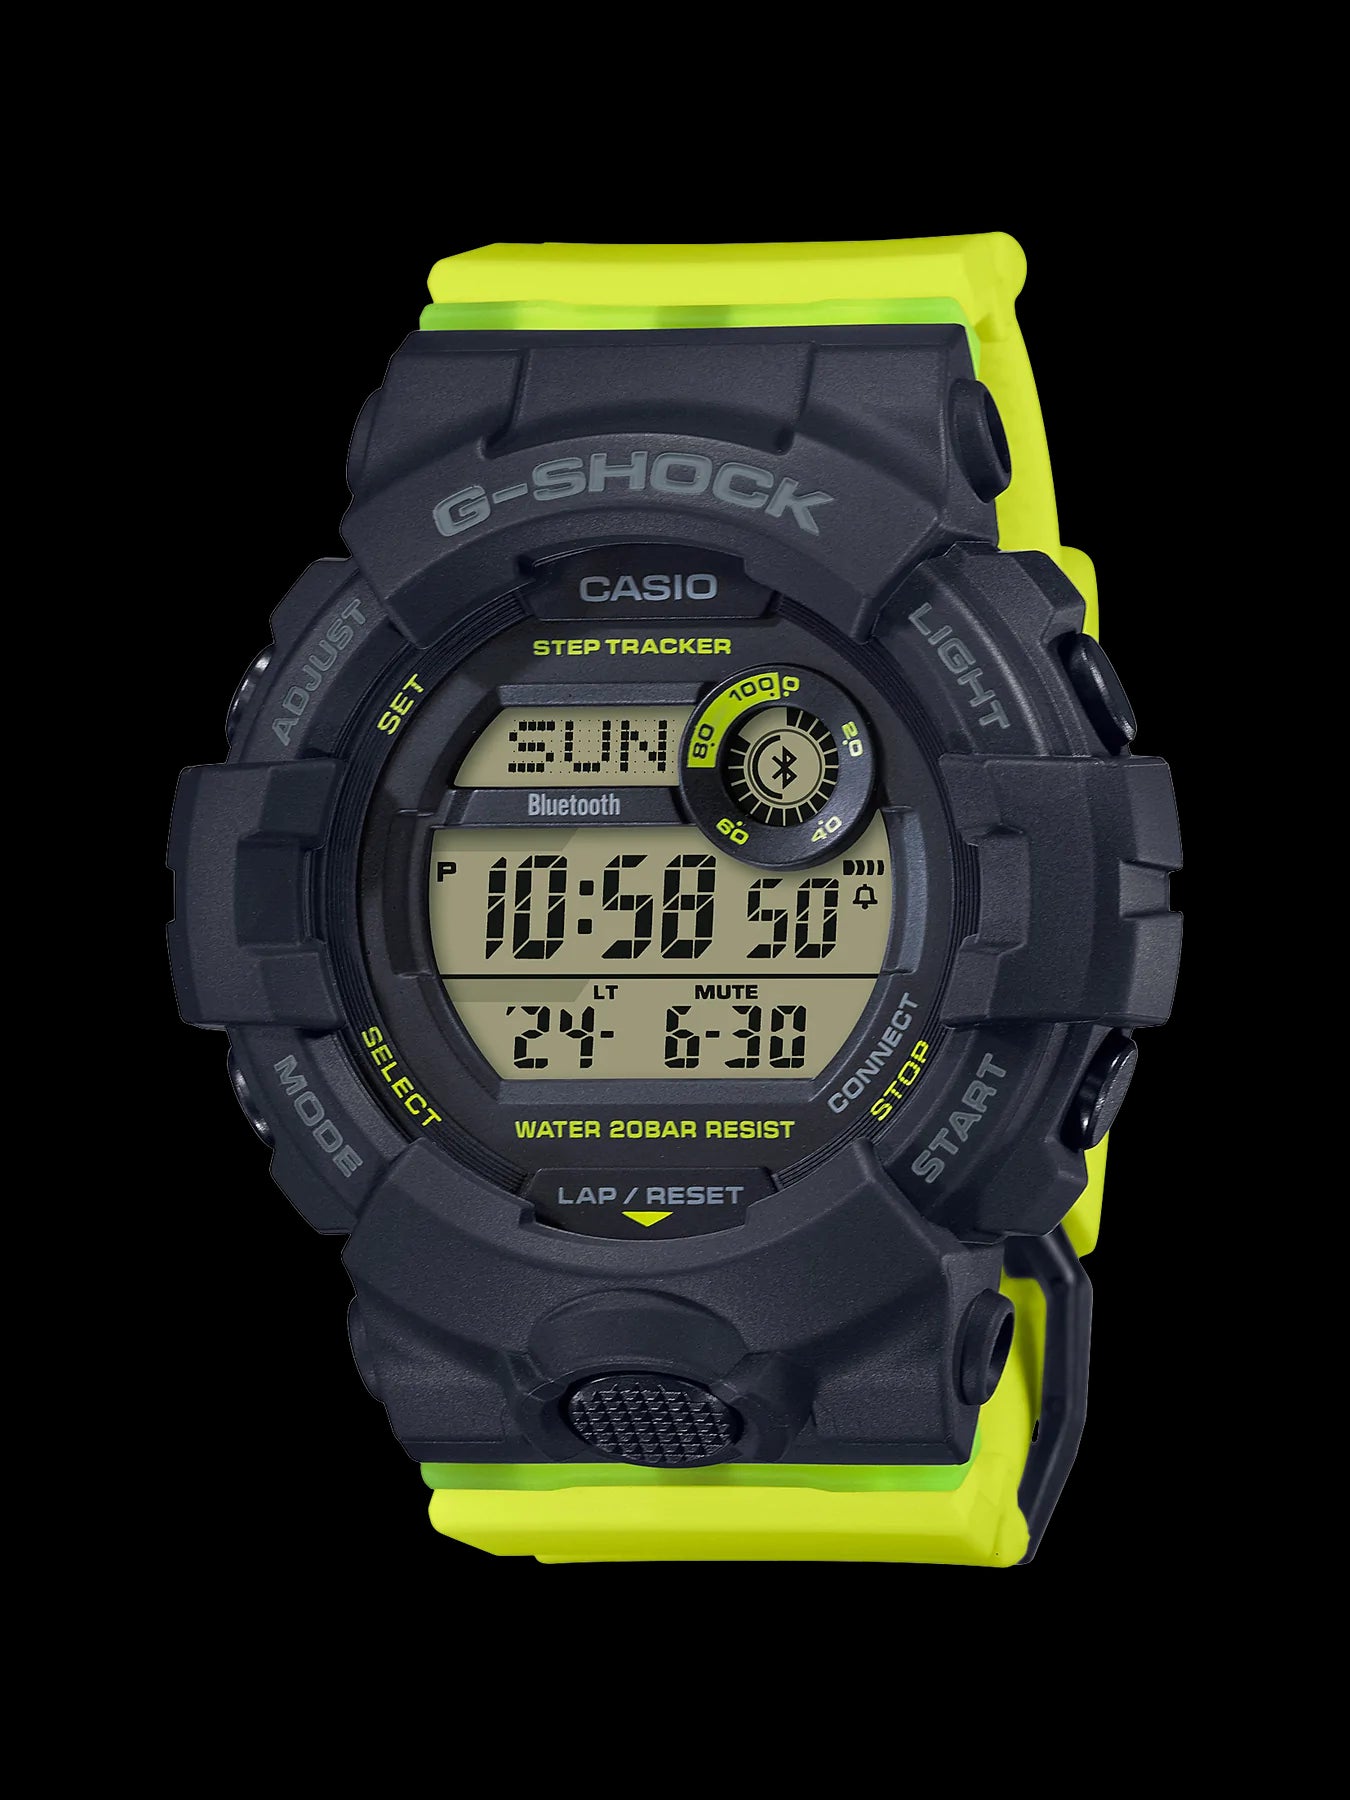 G-Shock Black & Yellow Sports Watch with Step Tracker